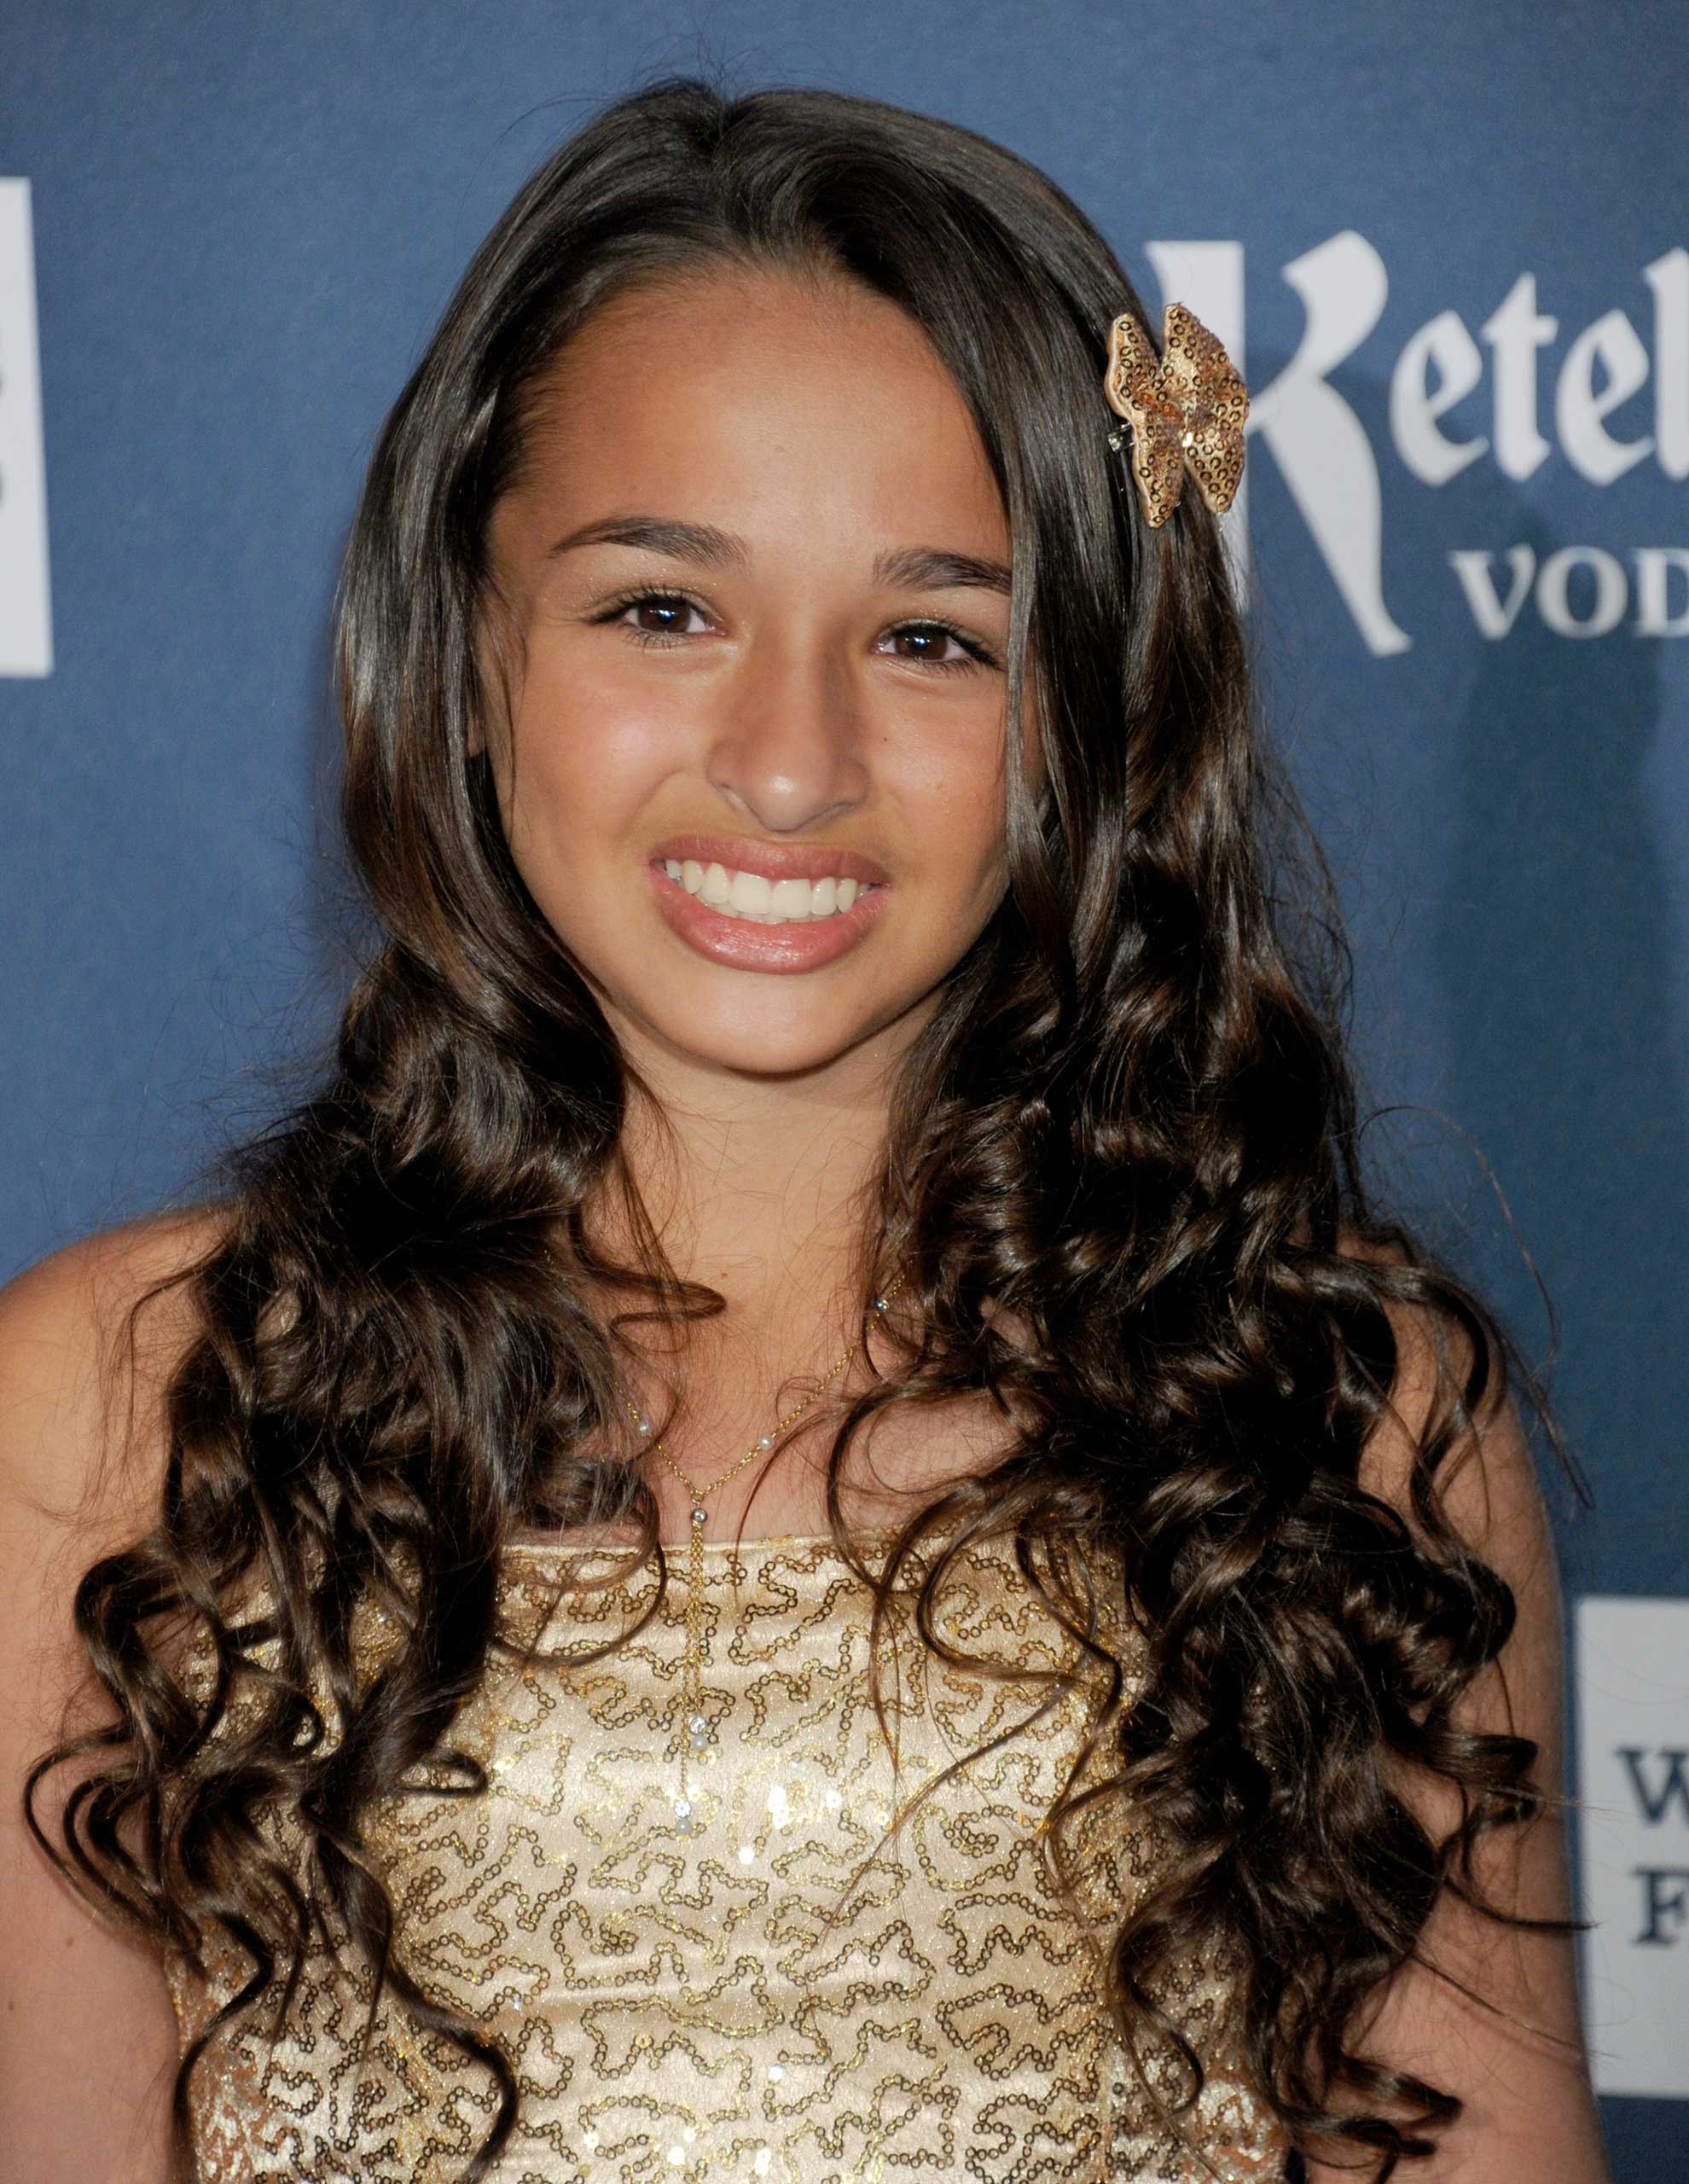 Jazz Jennings arrives at the 24th Annual GLAAD Media Awards at JW Marriott Los Angeles at L.A. LIVE on April 20, 2013 in Los Angeles, California. (Photo by Gregg DeGuire/WireImage)